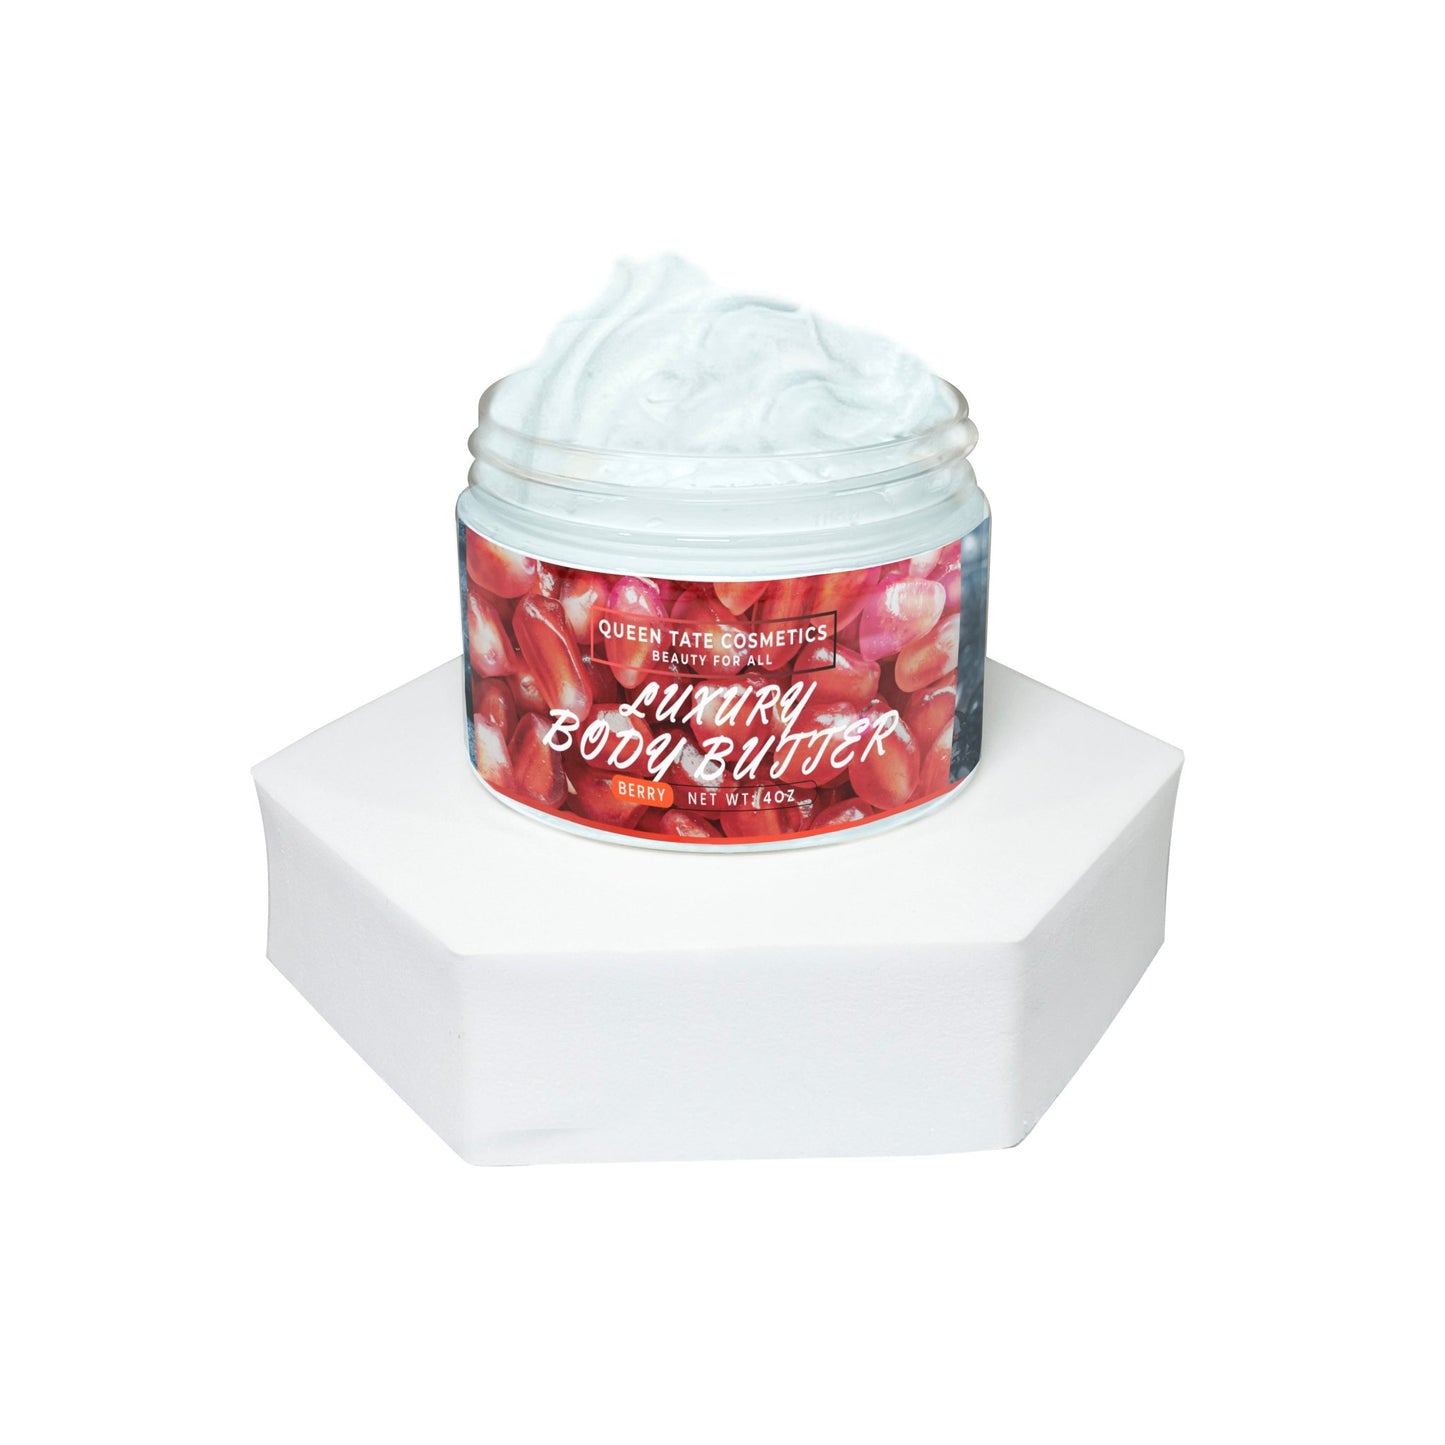 Berry-Handcrafted Body Butter - Queen Tate CosmeticsHandcrafted Luxury Body ButterBerry-Handcrafted Body ButterHandcrafted Luxury Body ButterQueen Tate Cosmetics 4 oz